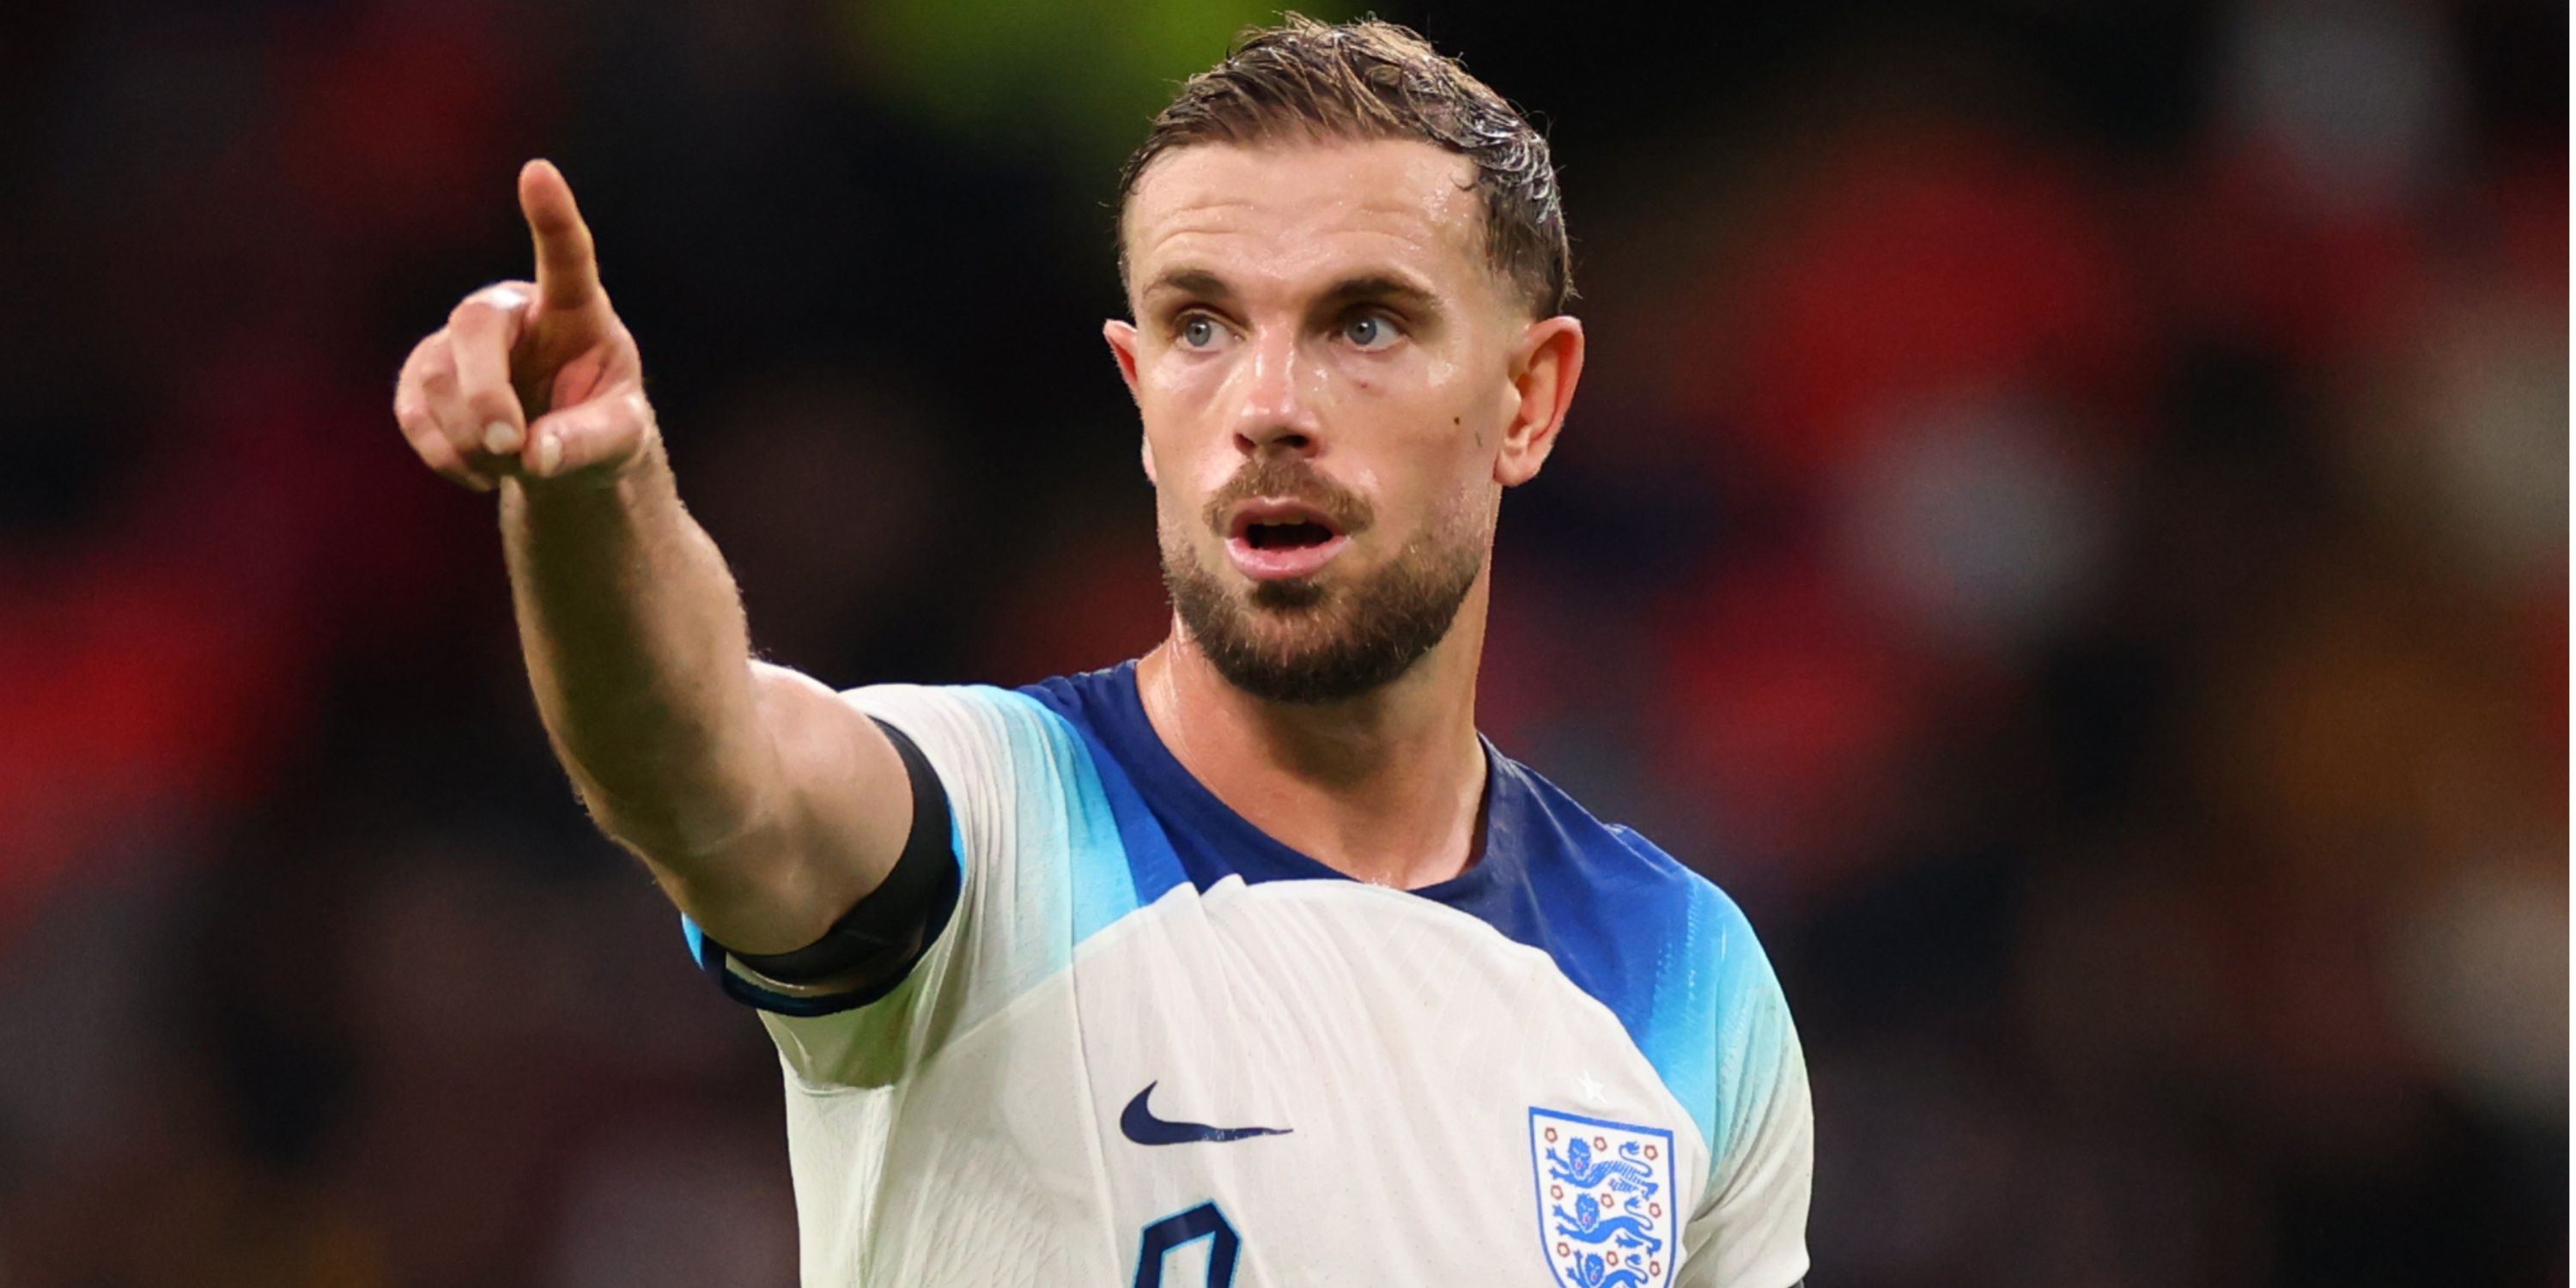 Gareth Southgate reacts to Jordan Henderson being loudly booed by England fans at Wembley